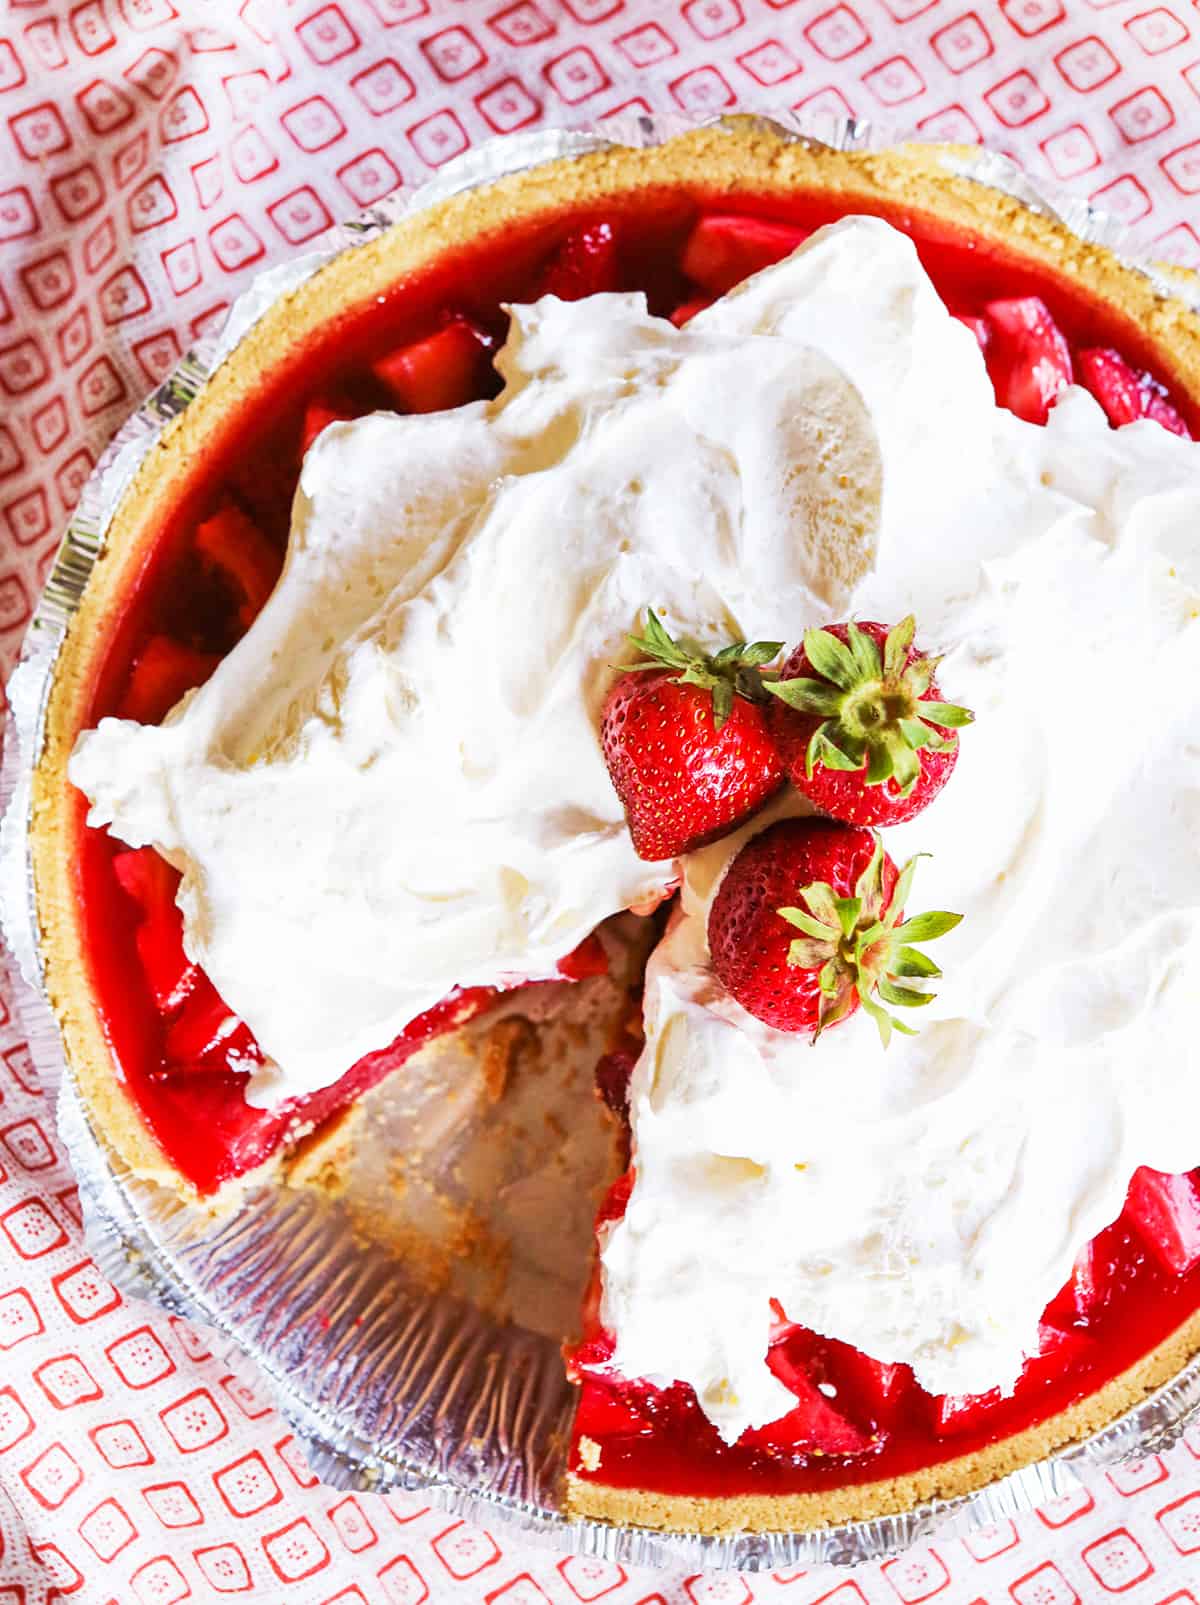 Top view of a strawberry pie topped with whipped cream and strawberries.